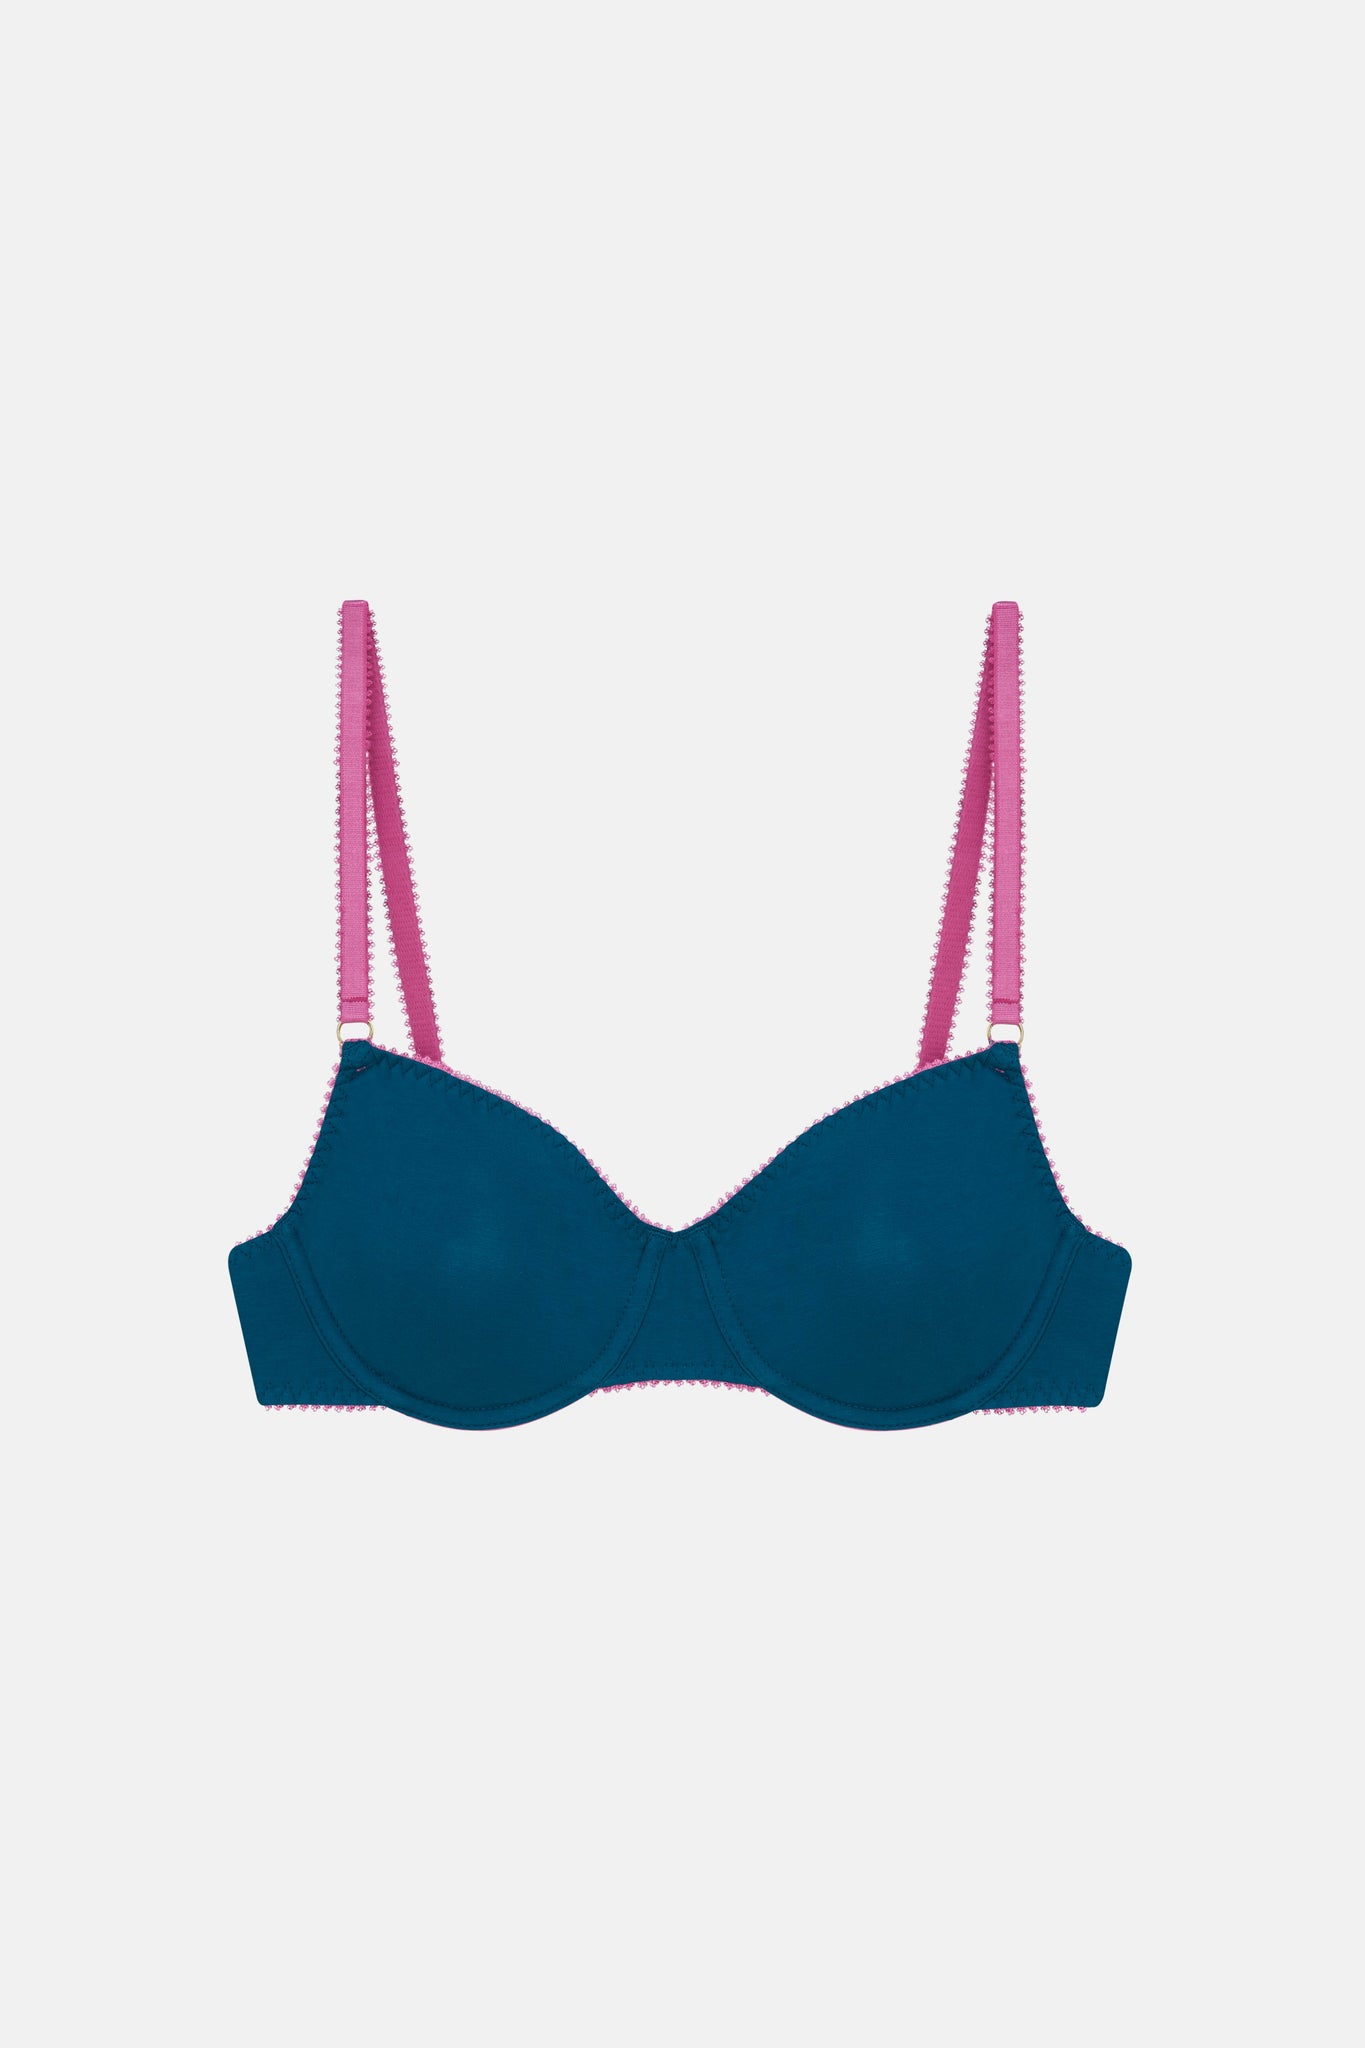 DORA LARSEN + NET SUSTAIN Anais recycled-lace soft-cup bra